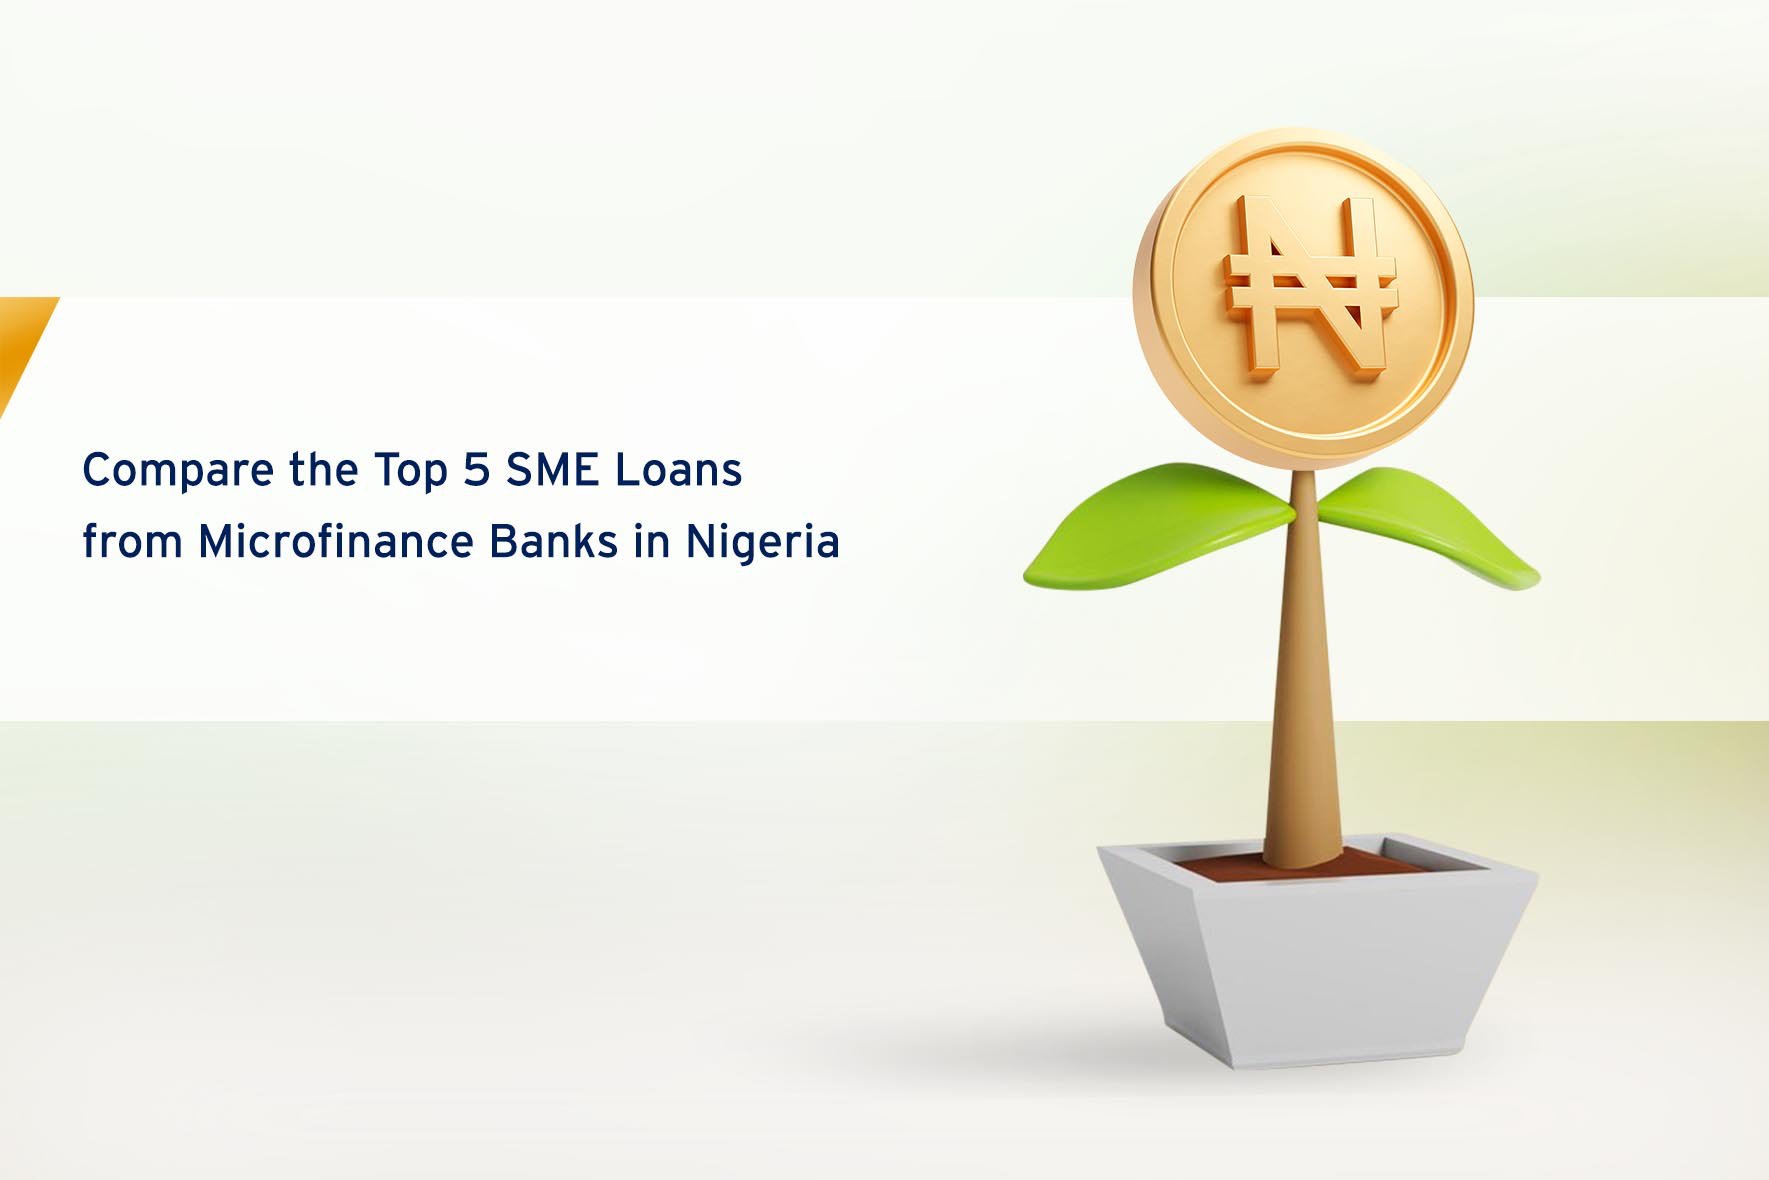 Compare the Top 5 SME Loans from Microfinance Banks in Nigeria cover